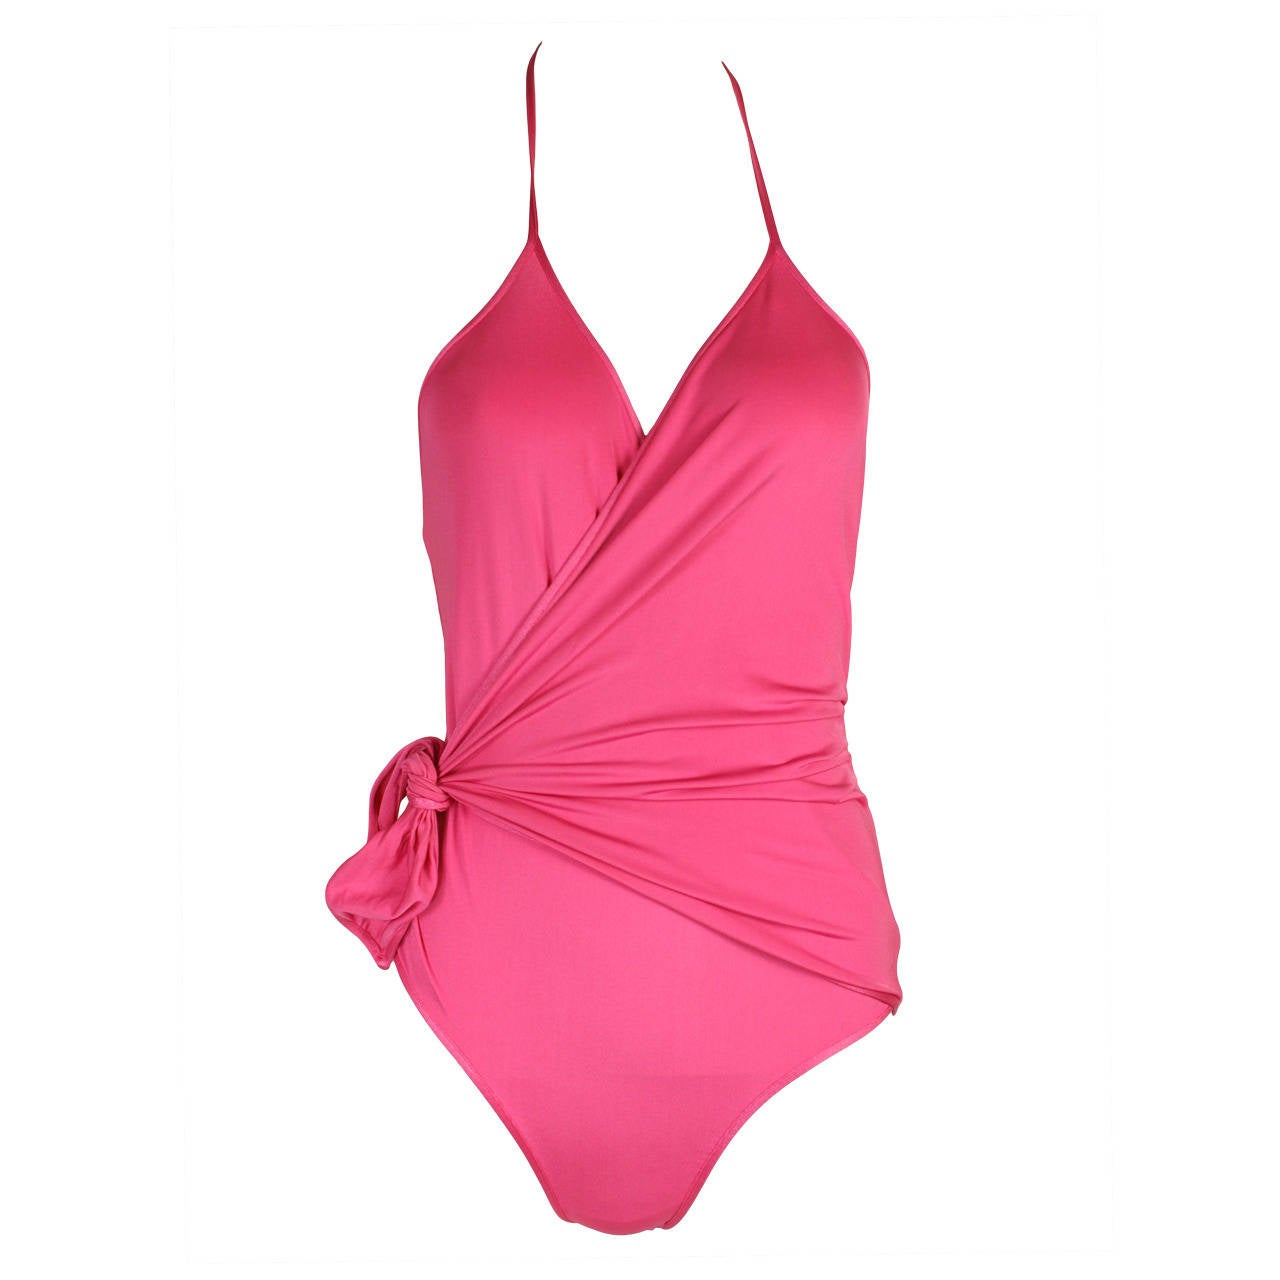 Early Gianni Versace 1970s Pink Wrap Bathing Suit New with Tags For Sale